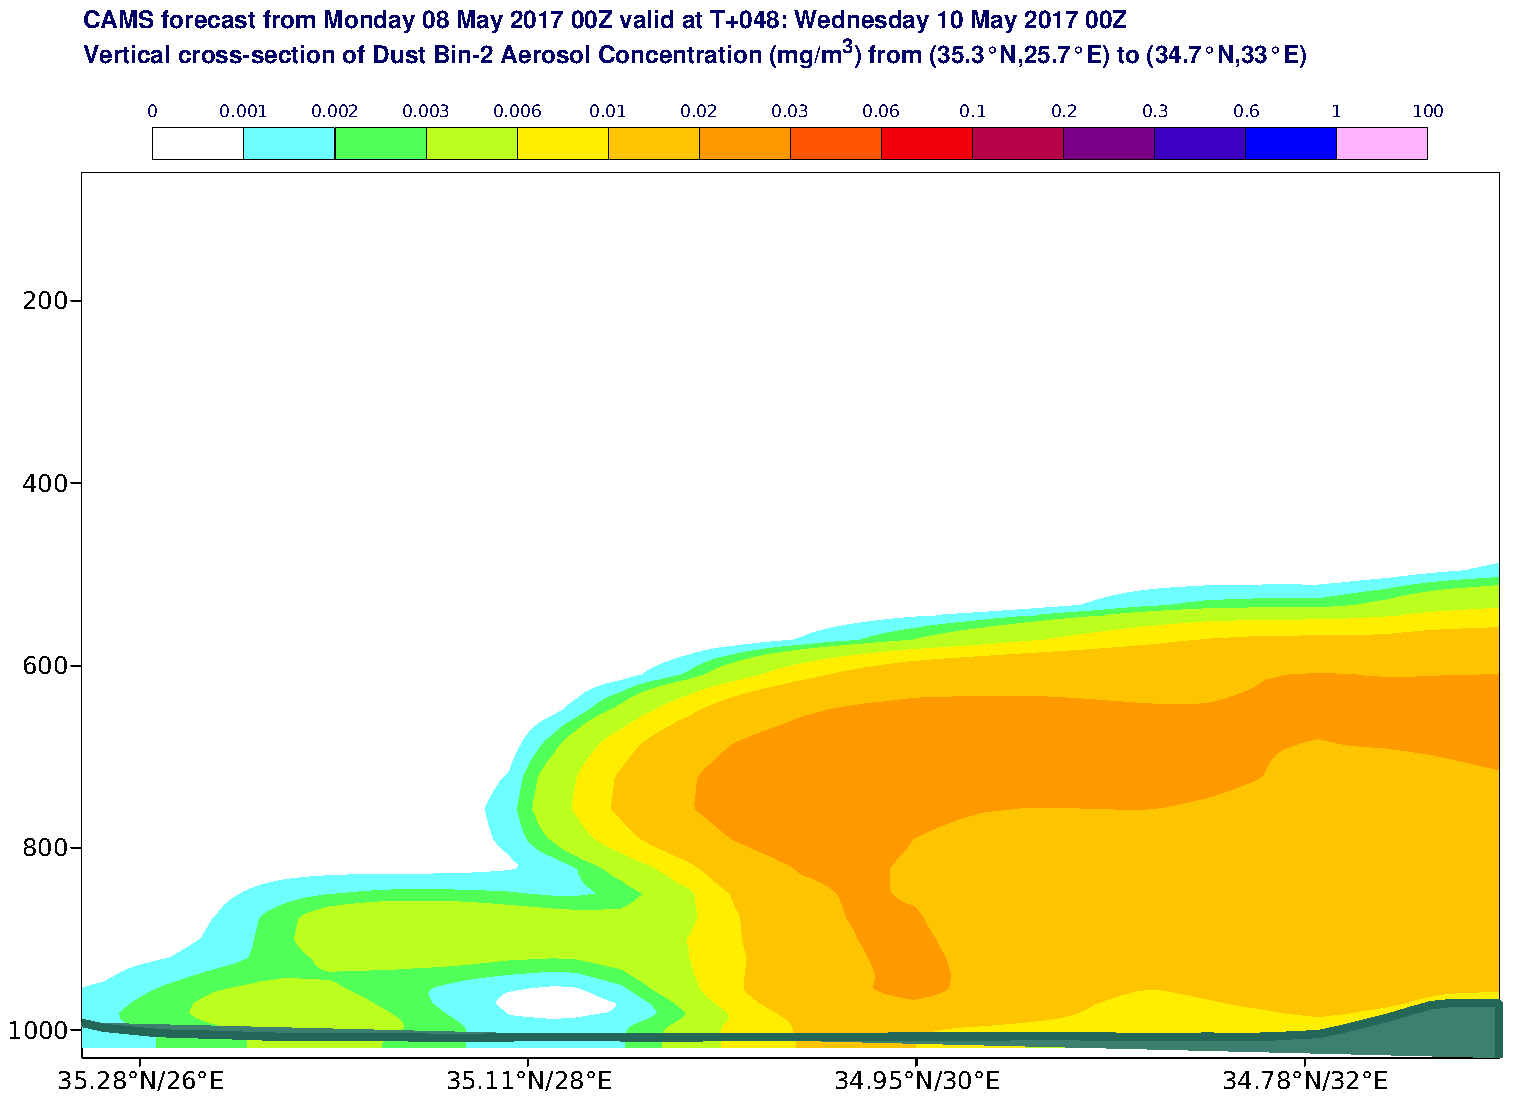 Vertical cross-section of Dust Bin-2 Aerosol Concentration (mg/m3) valid at T48 - 2017-05-10 00:00